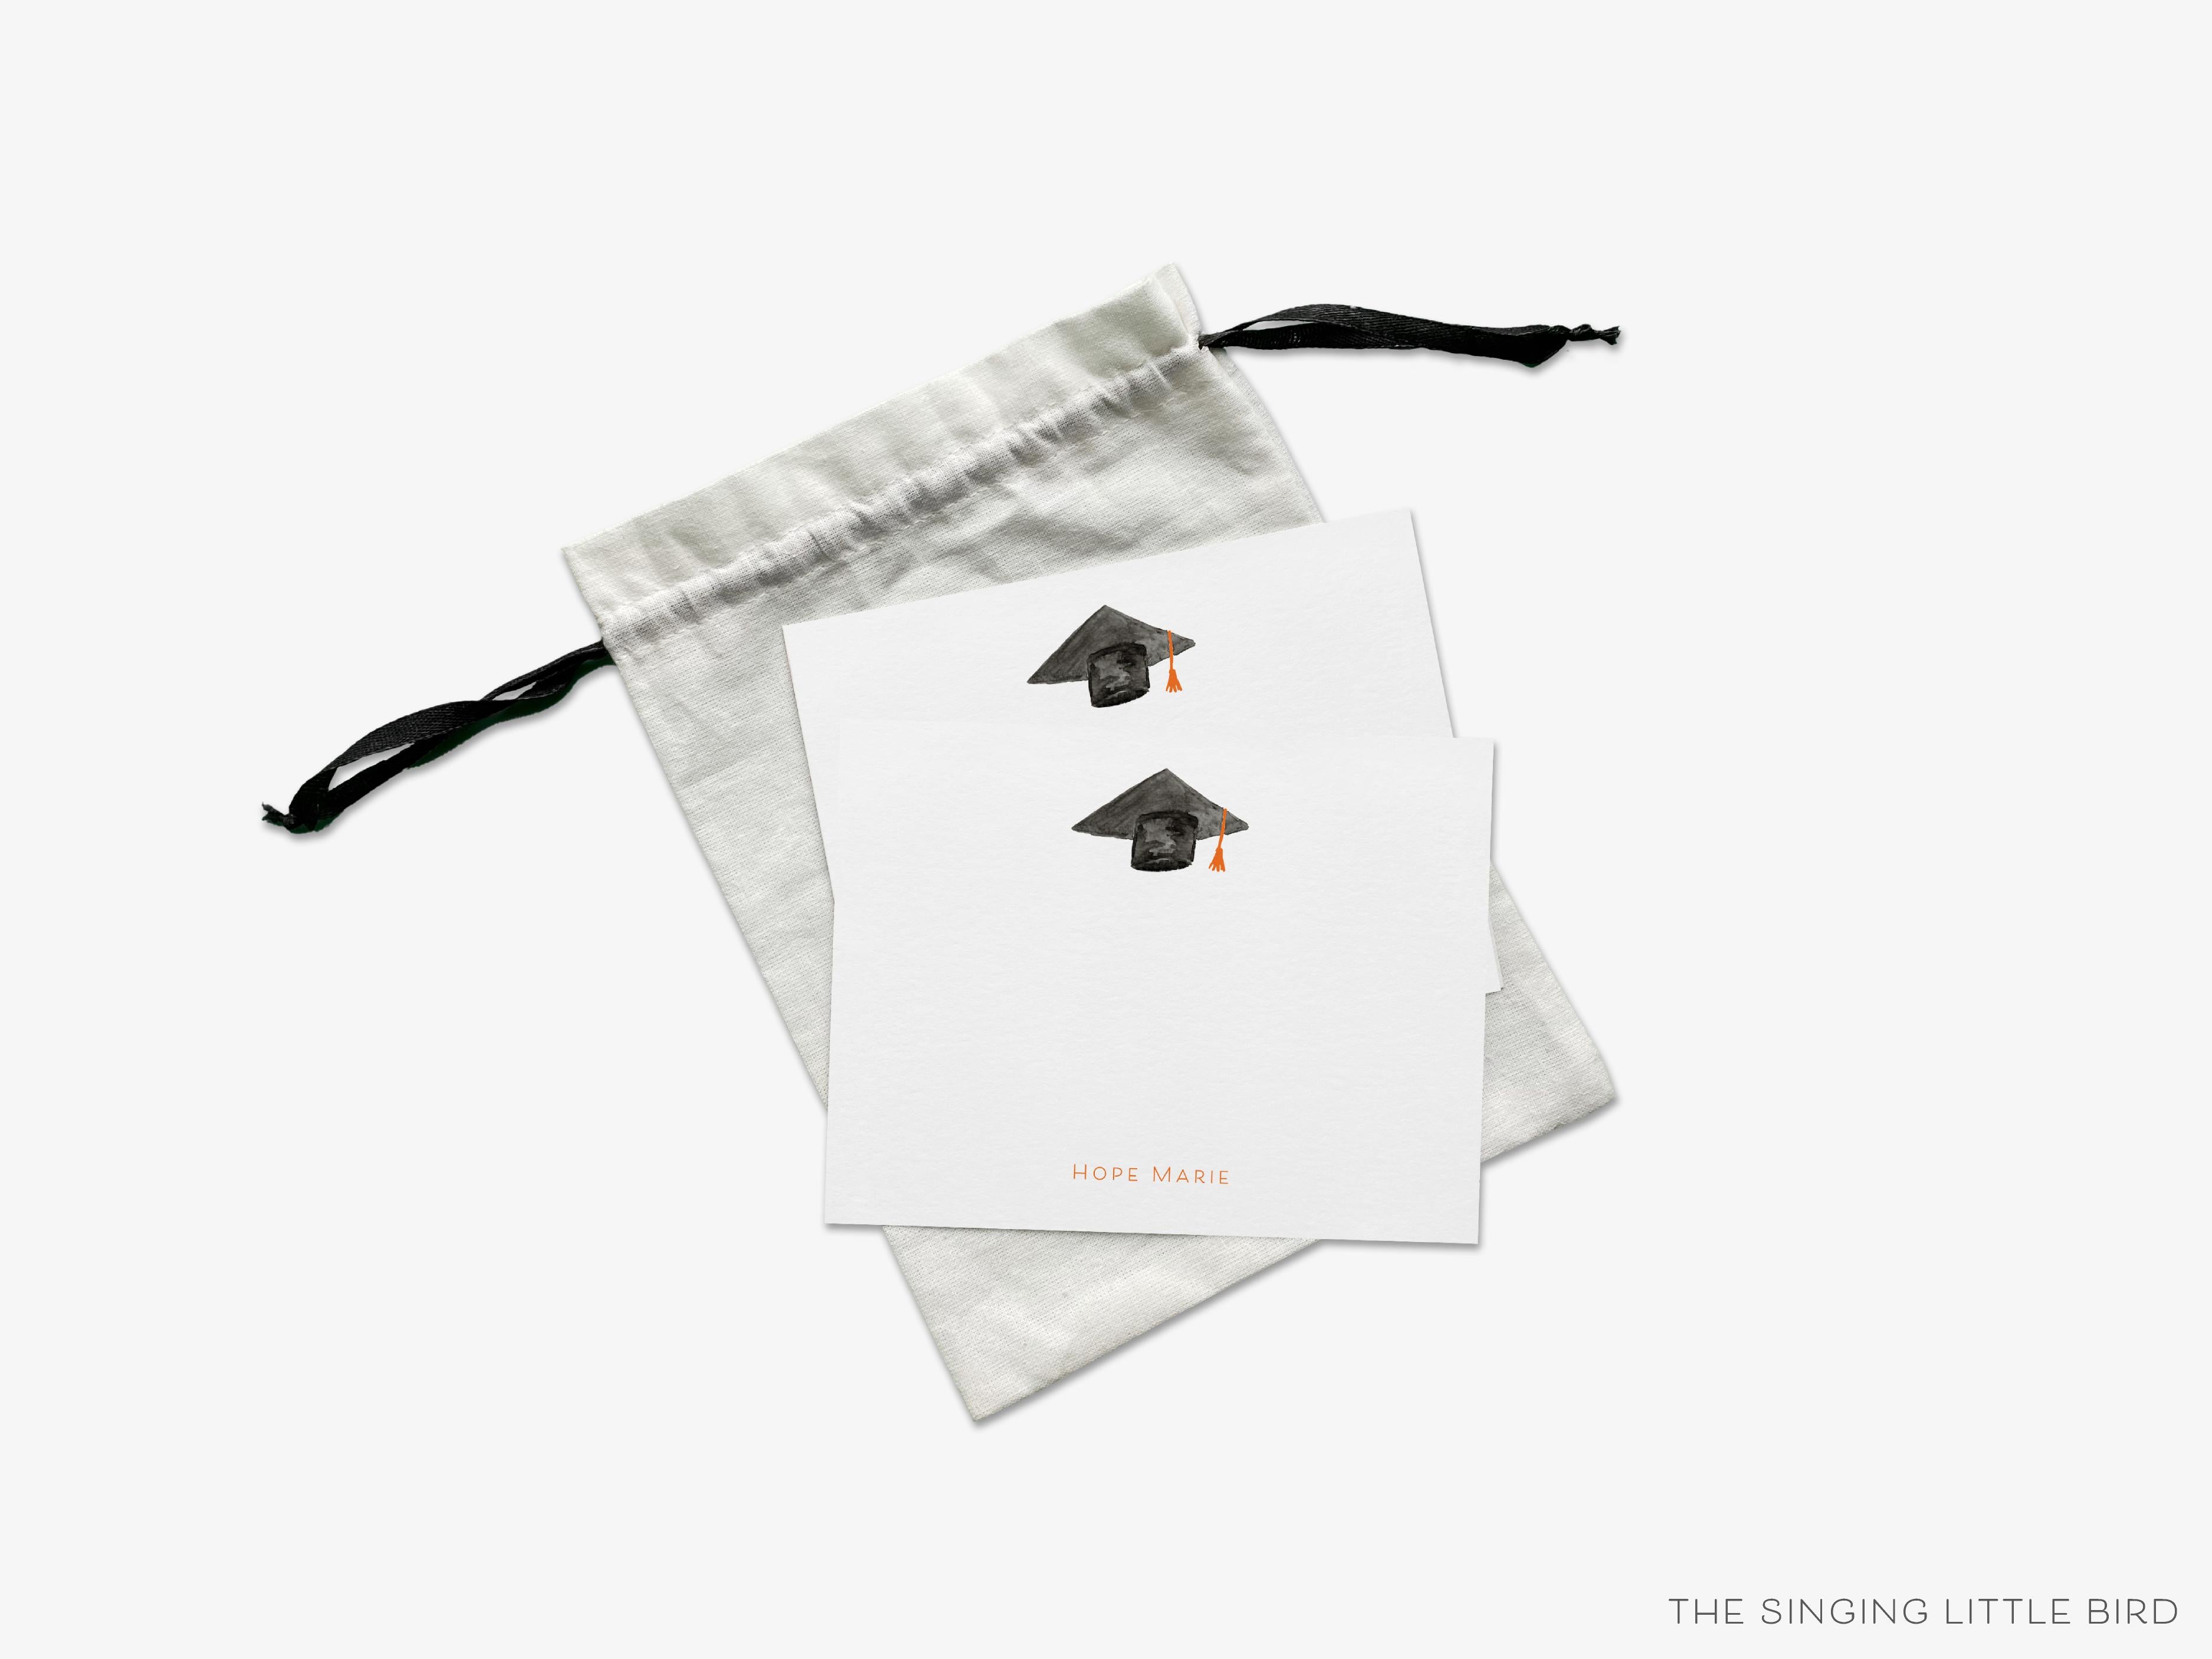 Personalized Graduation Cap Flat Notes-These personalized flat graduation announcements are 4.25x5.5 and feature our hand-painted watercolor graduation cap, printed in the USA on 120lb textured stock. They come with your choice of envelopes and make great gifts or thank you cards for the graduate in your life.-The Singing Little Bird